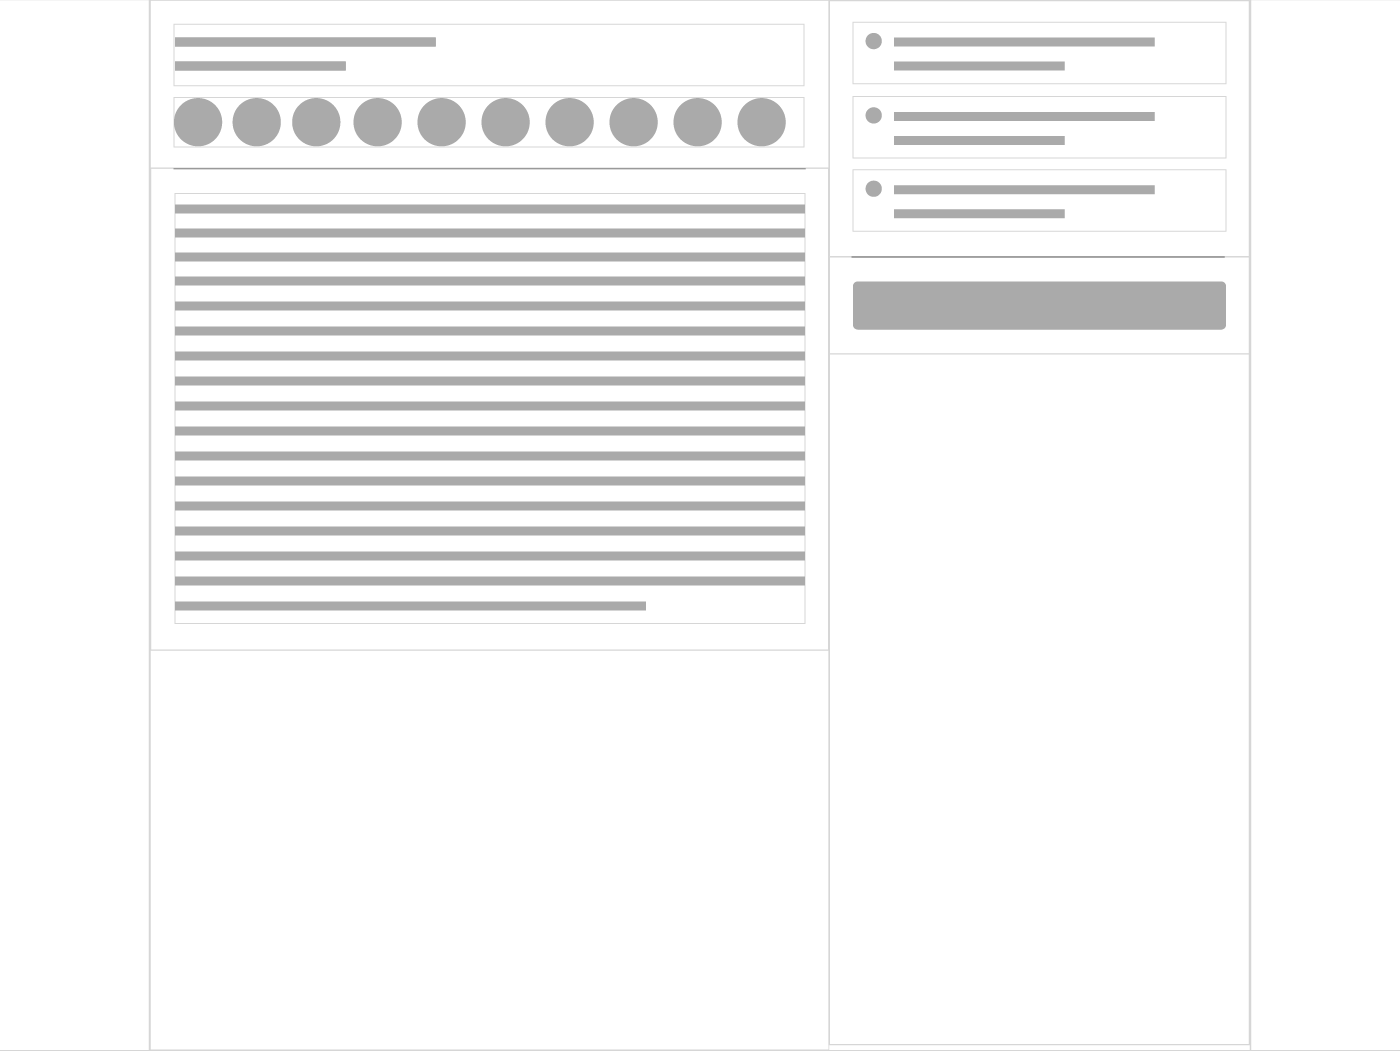 Page layed out using layout components